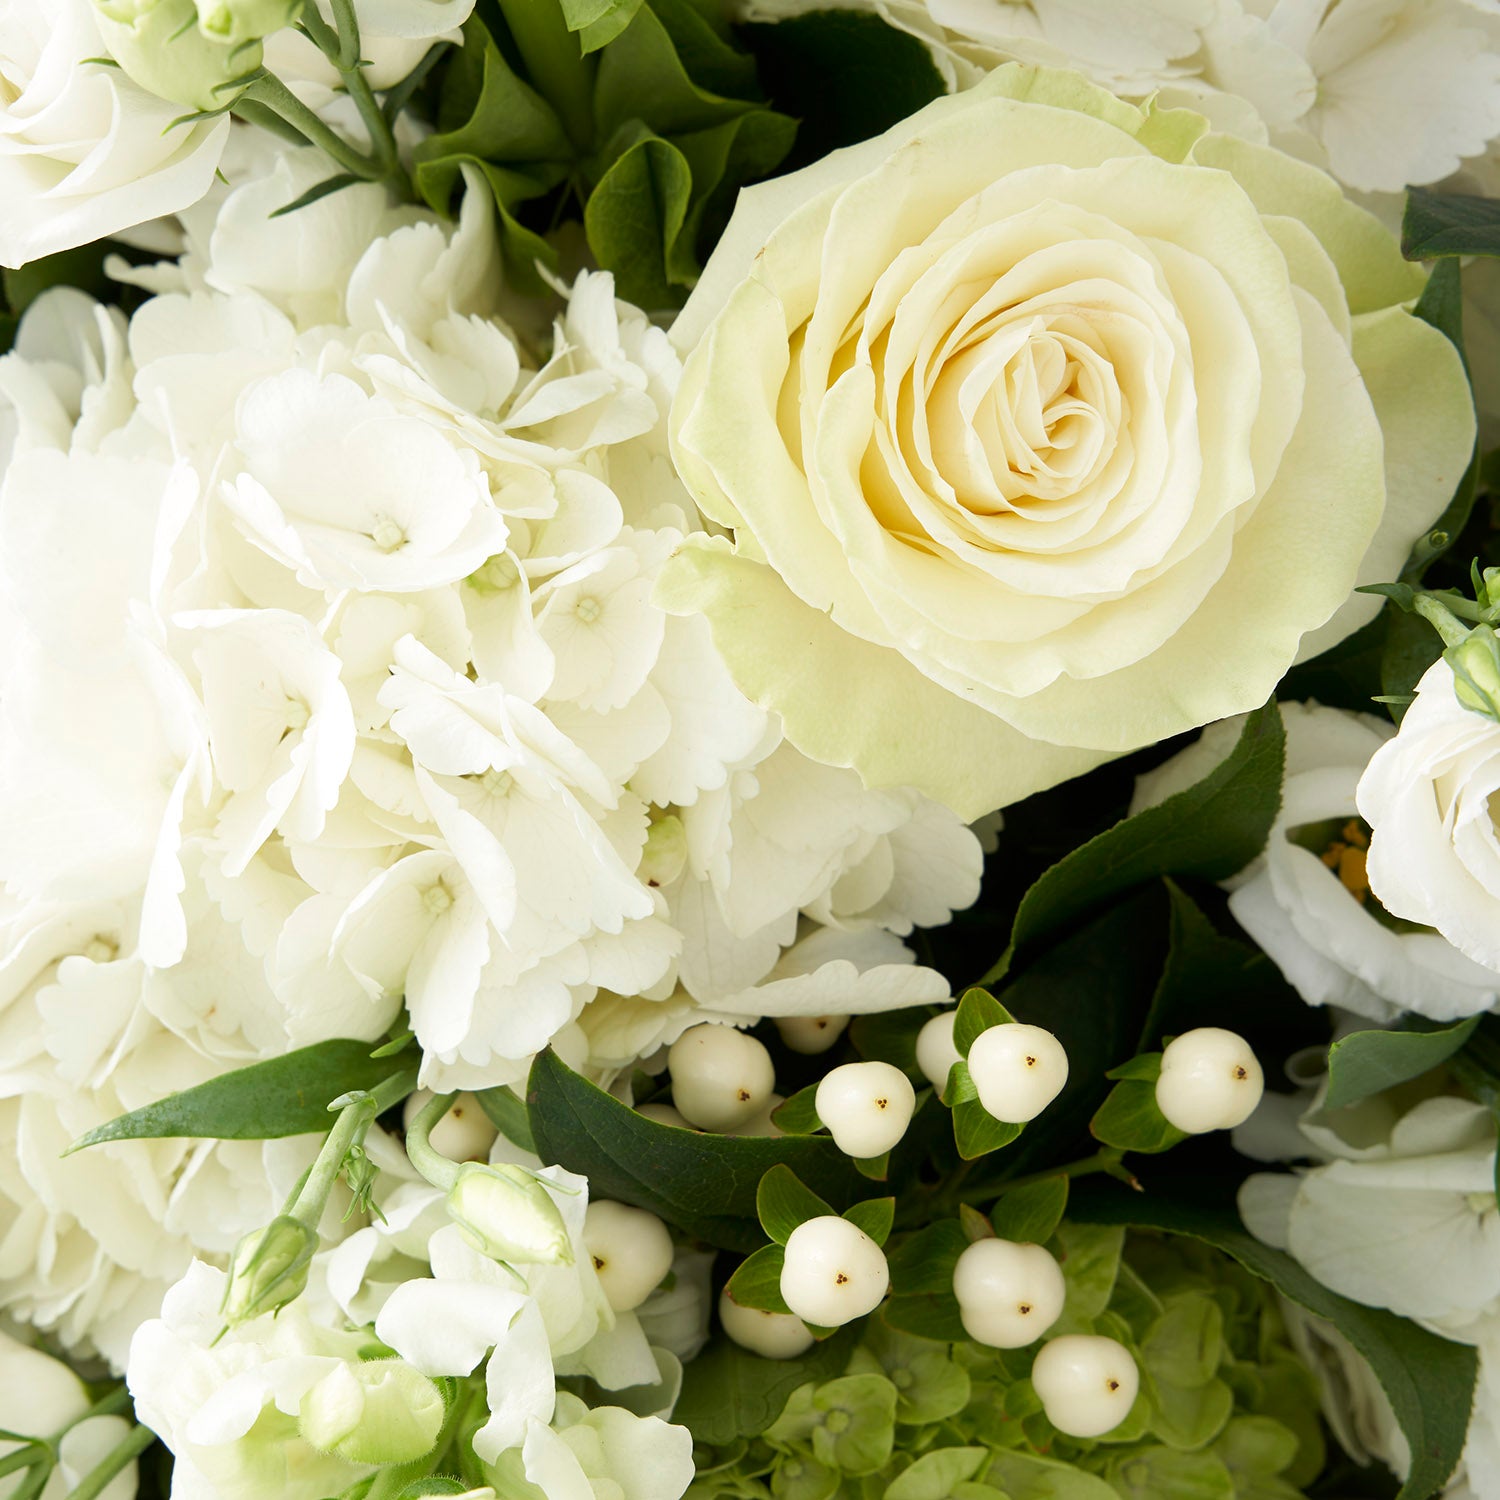 Close up of a white rose, white hydrangea, and white hypericum berries.